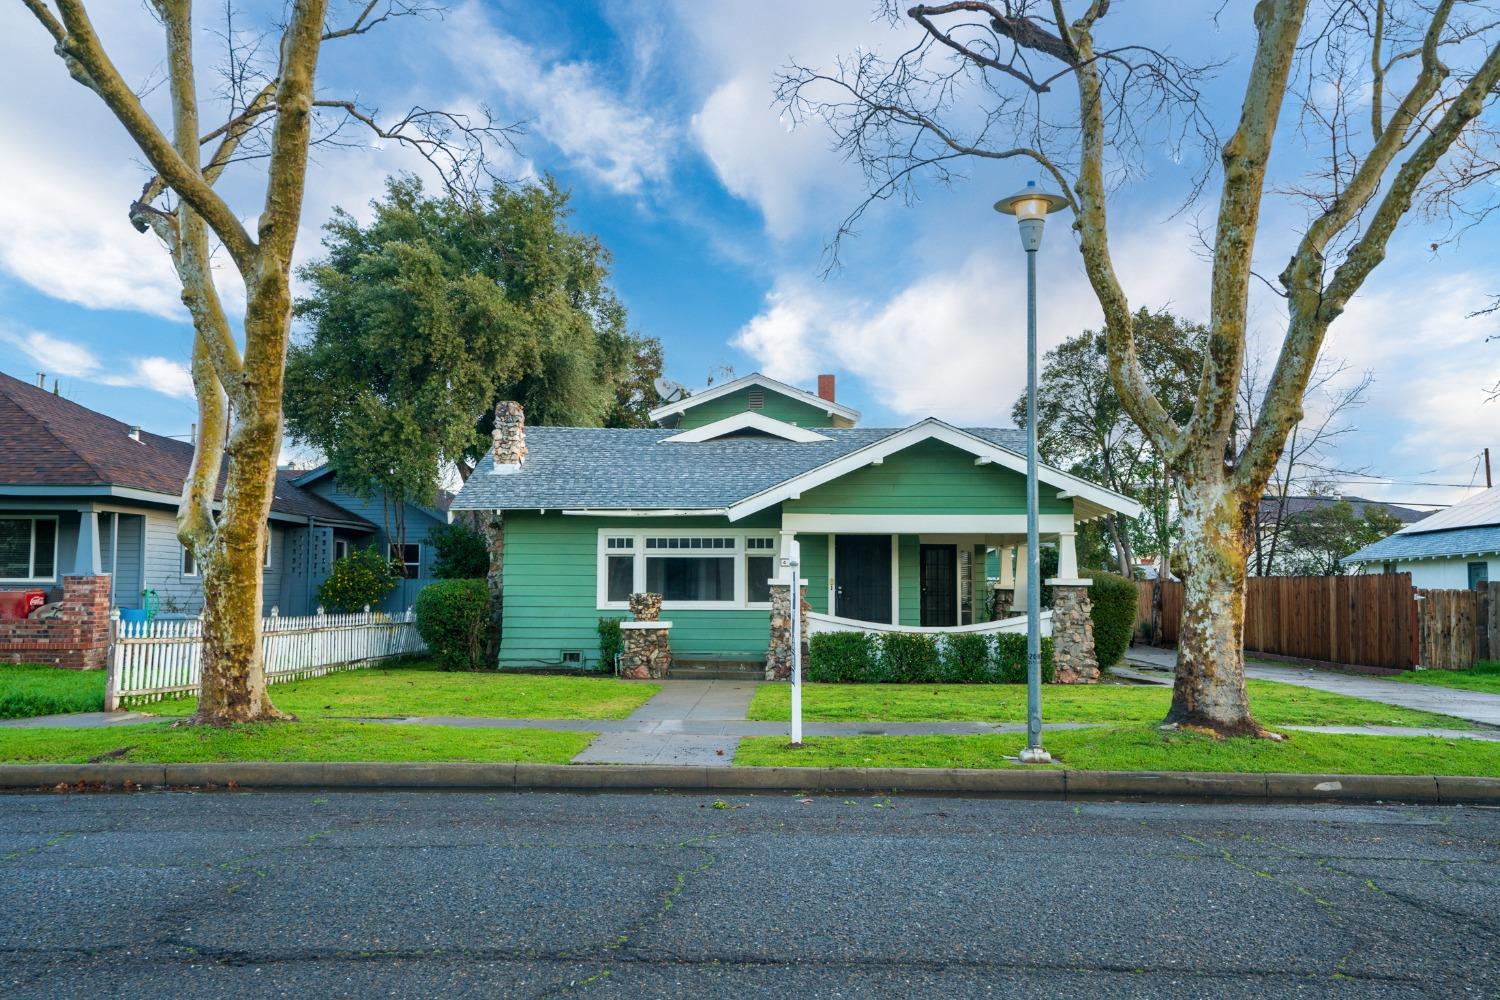 Welcome to 49 W. 22nd St. Merced a Craftsman style Property. It's your turn to enjoy this downtown h